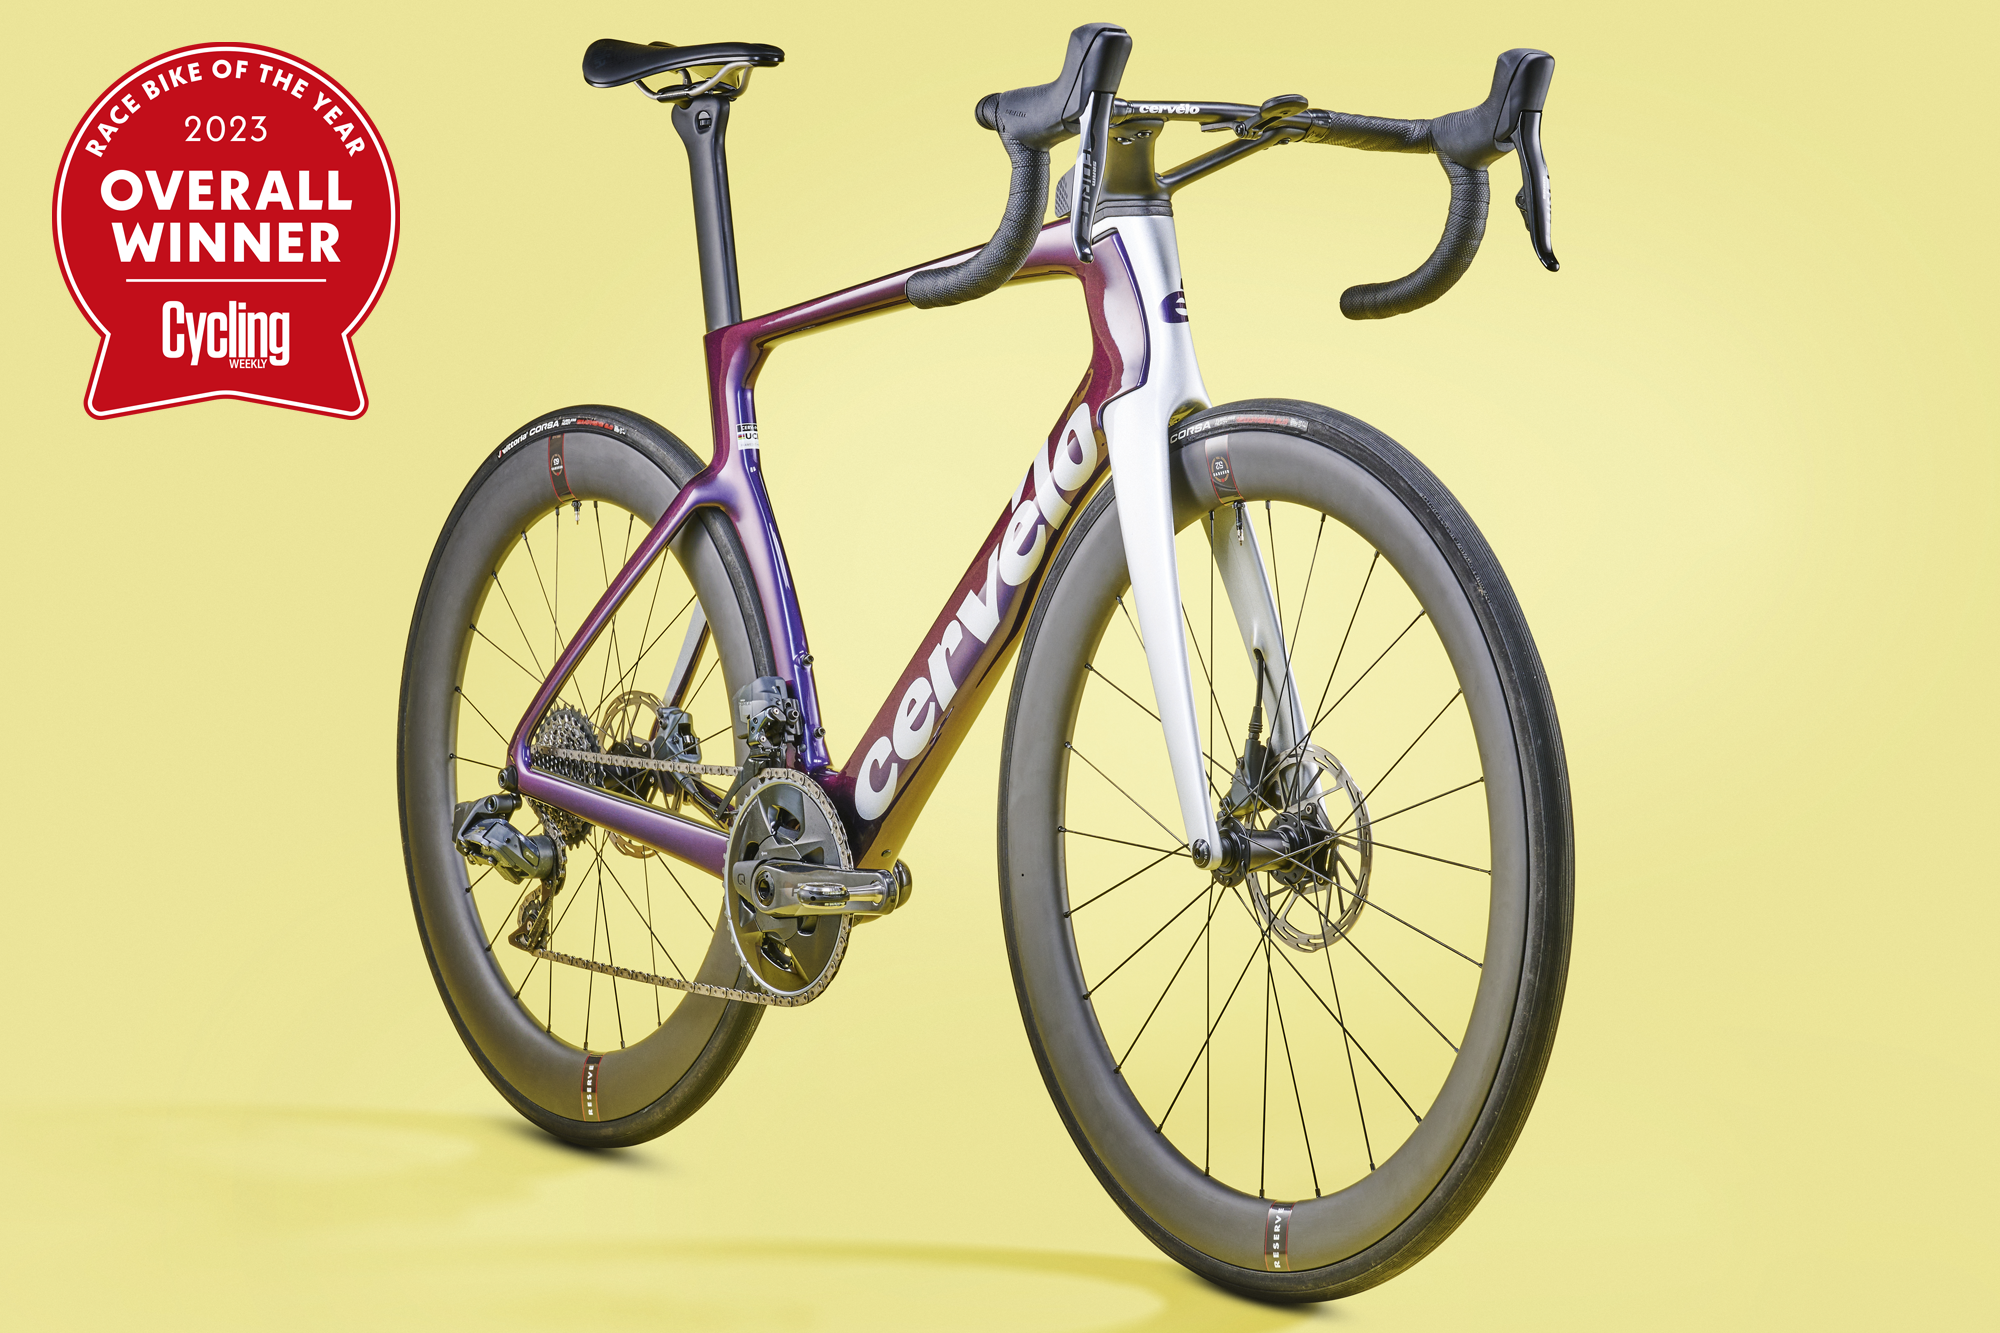 Cervélo S5 with the 2023 Race Bike of the Year 'Overall Winner' award roundel